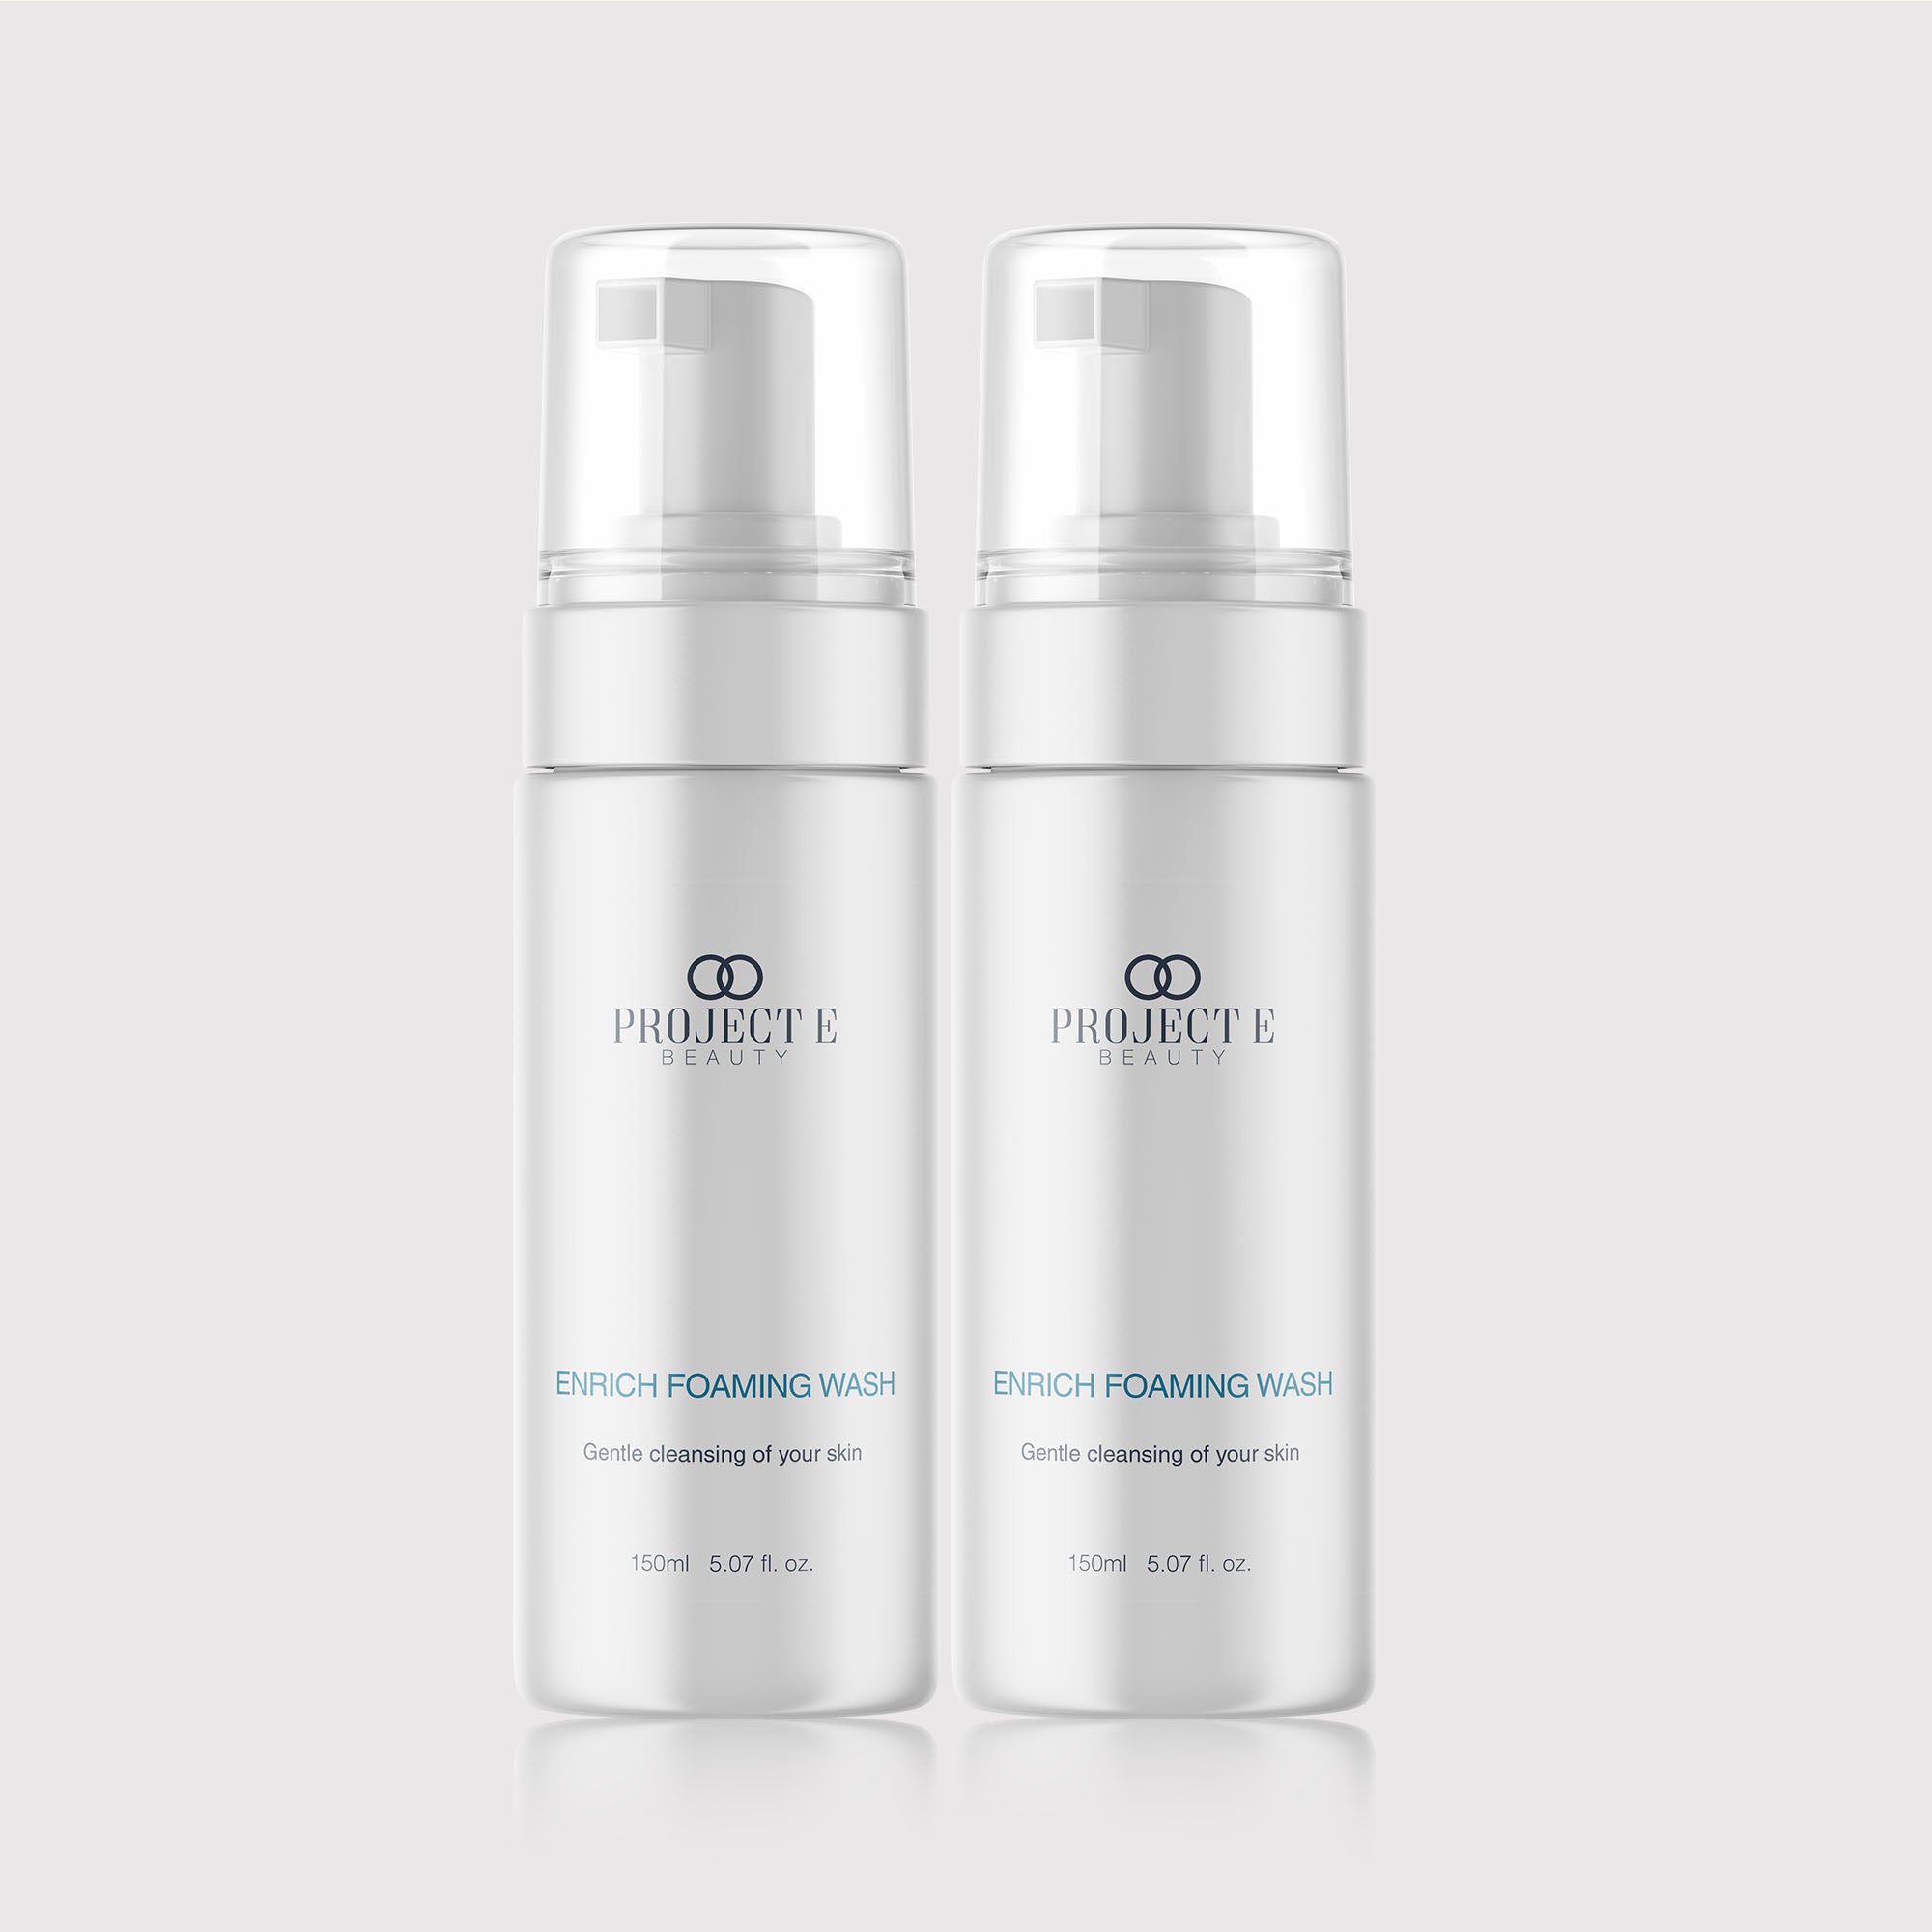 Duo Gentle Cleansing Foaming Wash Set - Project E Beauty